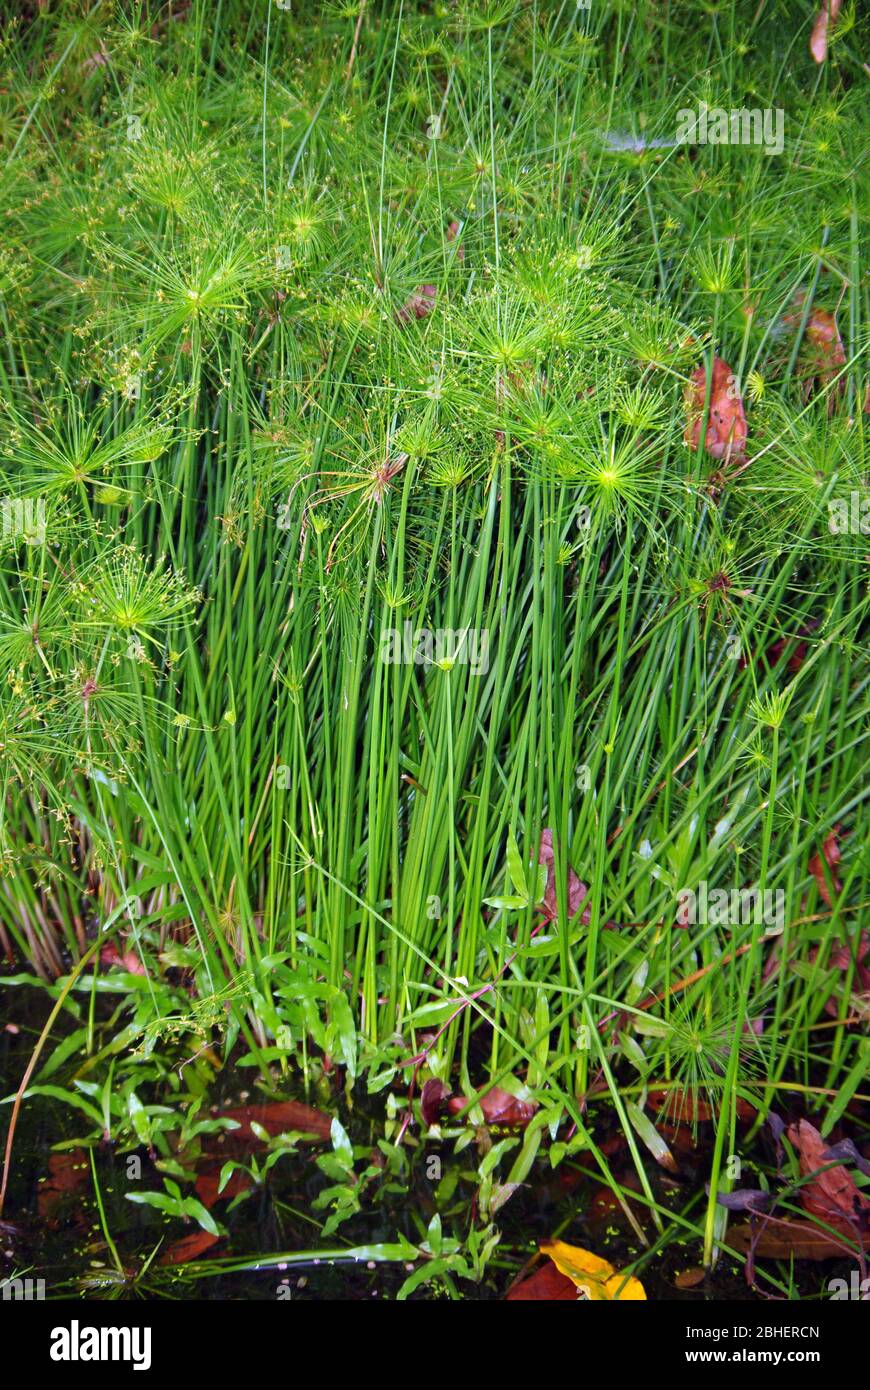 Paper or papyrus plant, Cyperus sp. Stock Photo